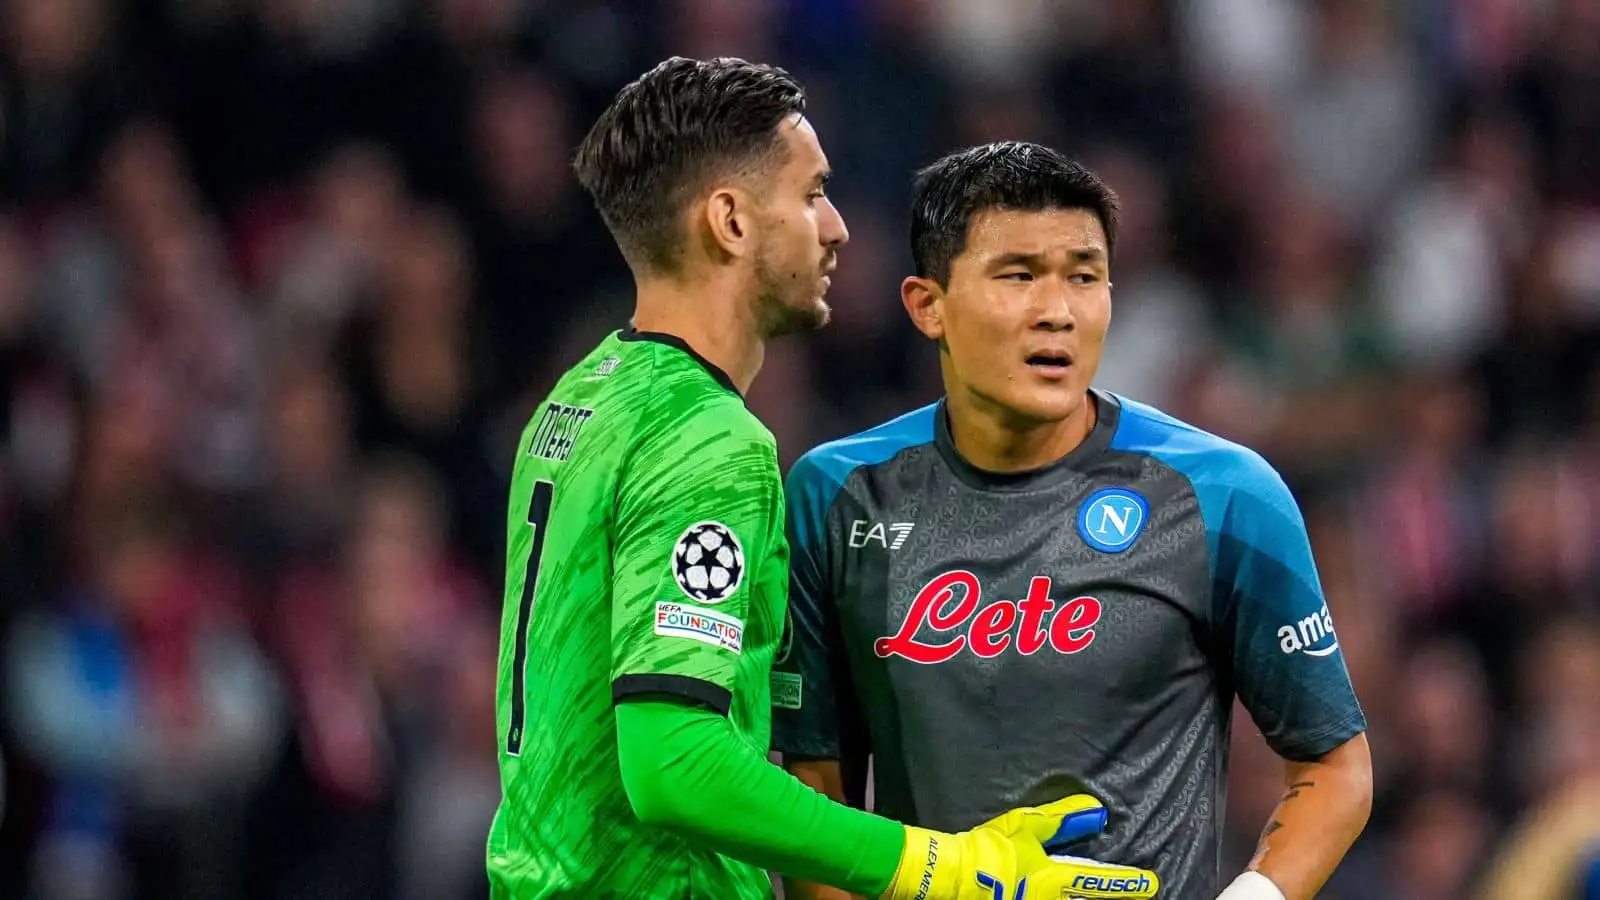 Goalkeeper Alex Meret of Napoli, Minjae Kim of Napoli during the UEFA Champions League match between Ajax and Napoli at Johan Cruijff ArenA on October 4, 2022 in Amsterdam, Netherlands